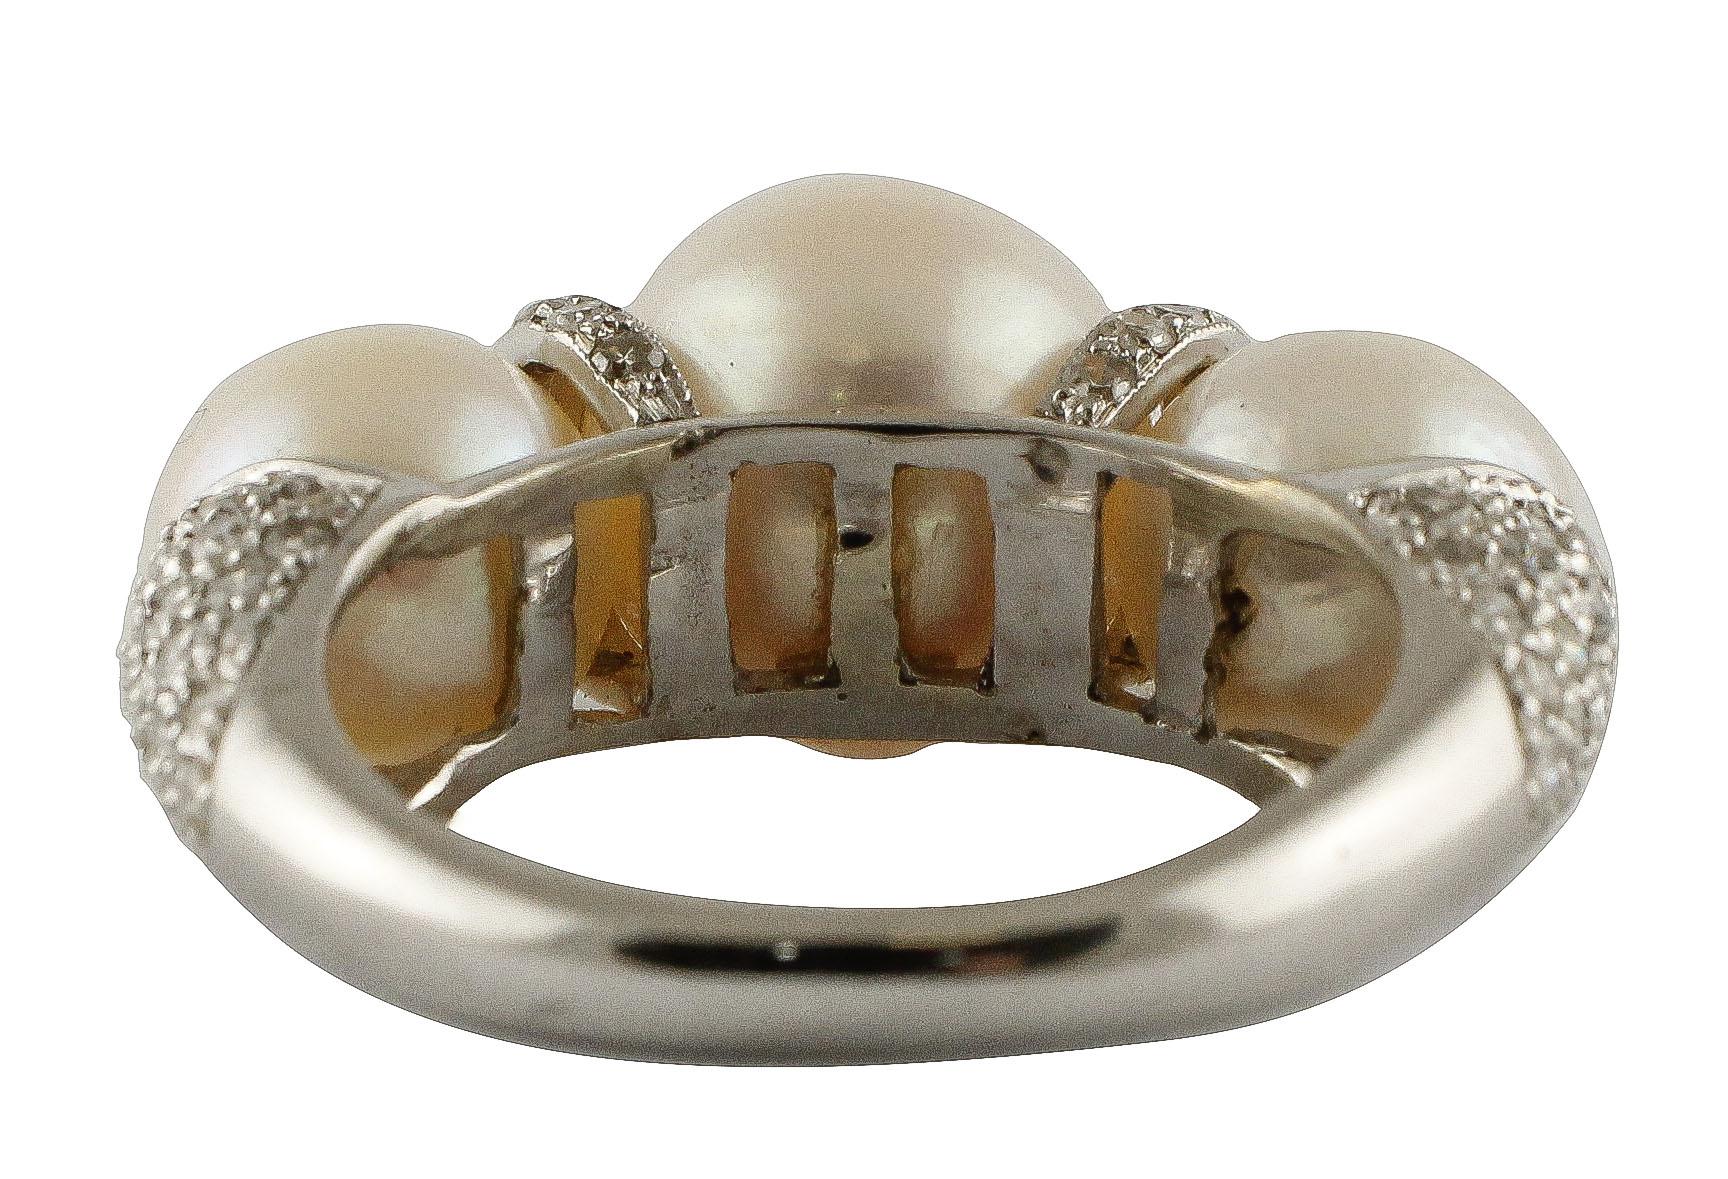 Mixed Cut Pearls, Diamonds, 14 Karat White Gold Ring. For Sale